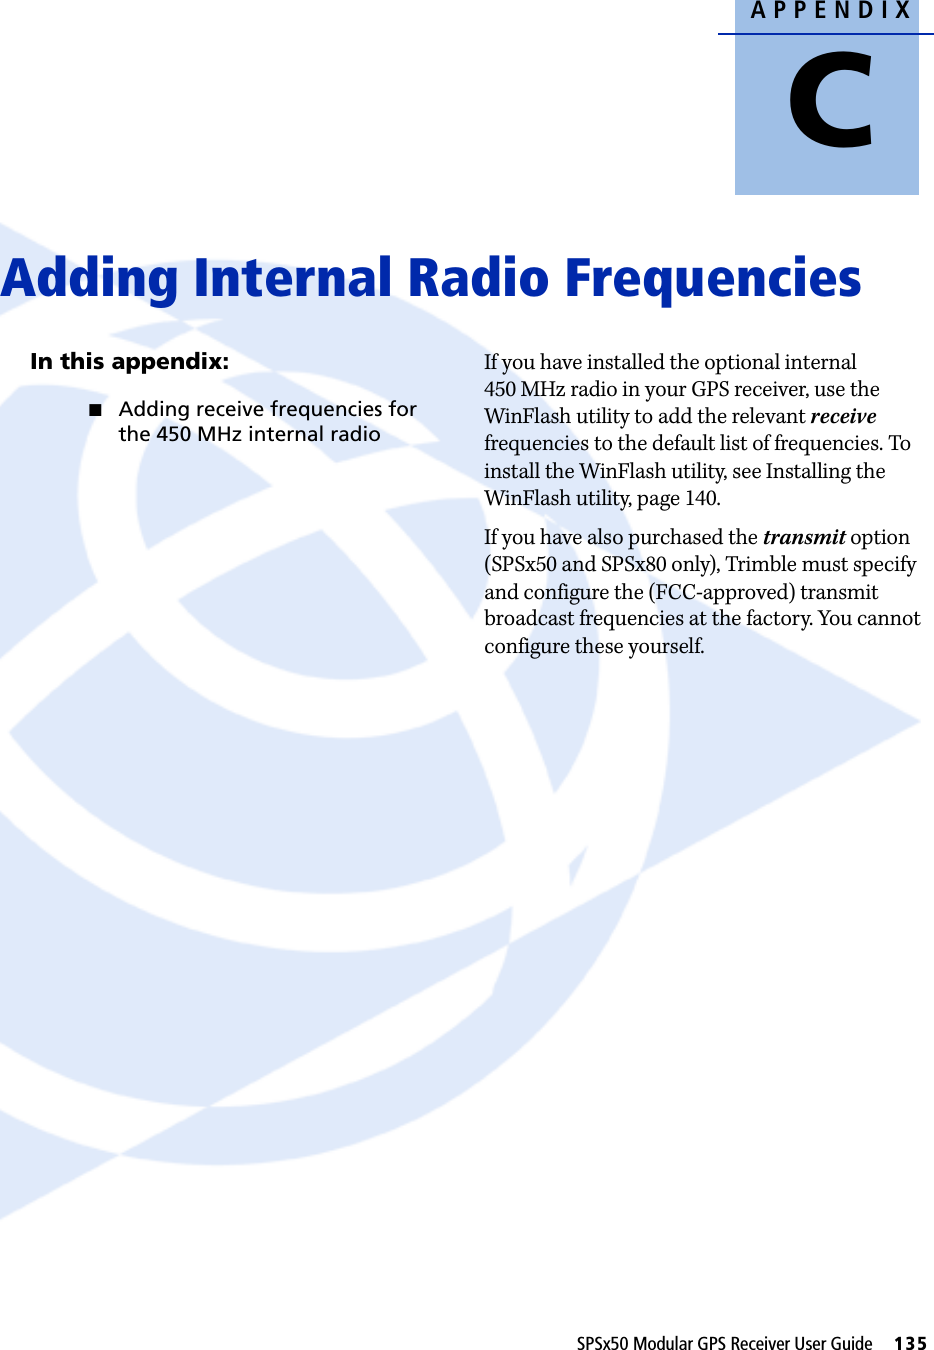 APPENDIXCSPSx50 Modular GPS Receiver User Guide     135Adding Internal Radio Frequencies CIn this appendix:QAdding receive frequencies for the 450 MHz internal radioIf you have installed the optional internal 450 MHz radio in your GPS receiver, use the WinFlash utility to add the relevant receive frequencies to the default list of frequencies. To install the WinFlash utility, see Installing the WinFlash utility, page 140.If you have also purchased the transmit option (SPSx50 and SPSx80 only), Trimble must specify and configure the (FCC-approved) transmit broadcast frequencies at the factory. You cannot configure these yourself.